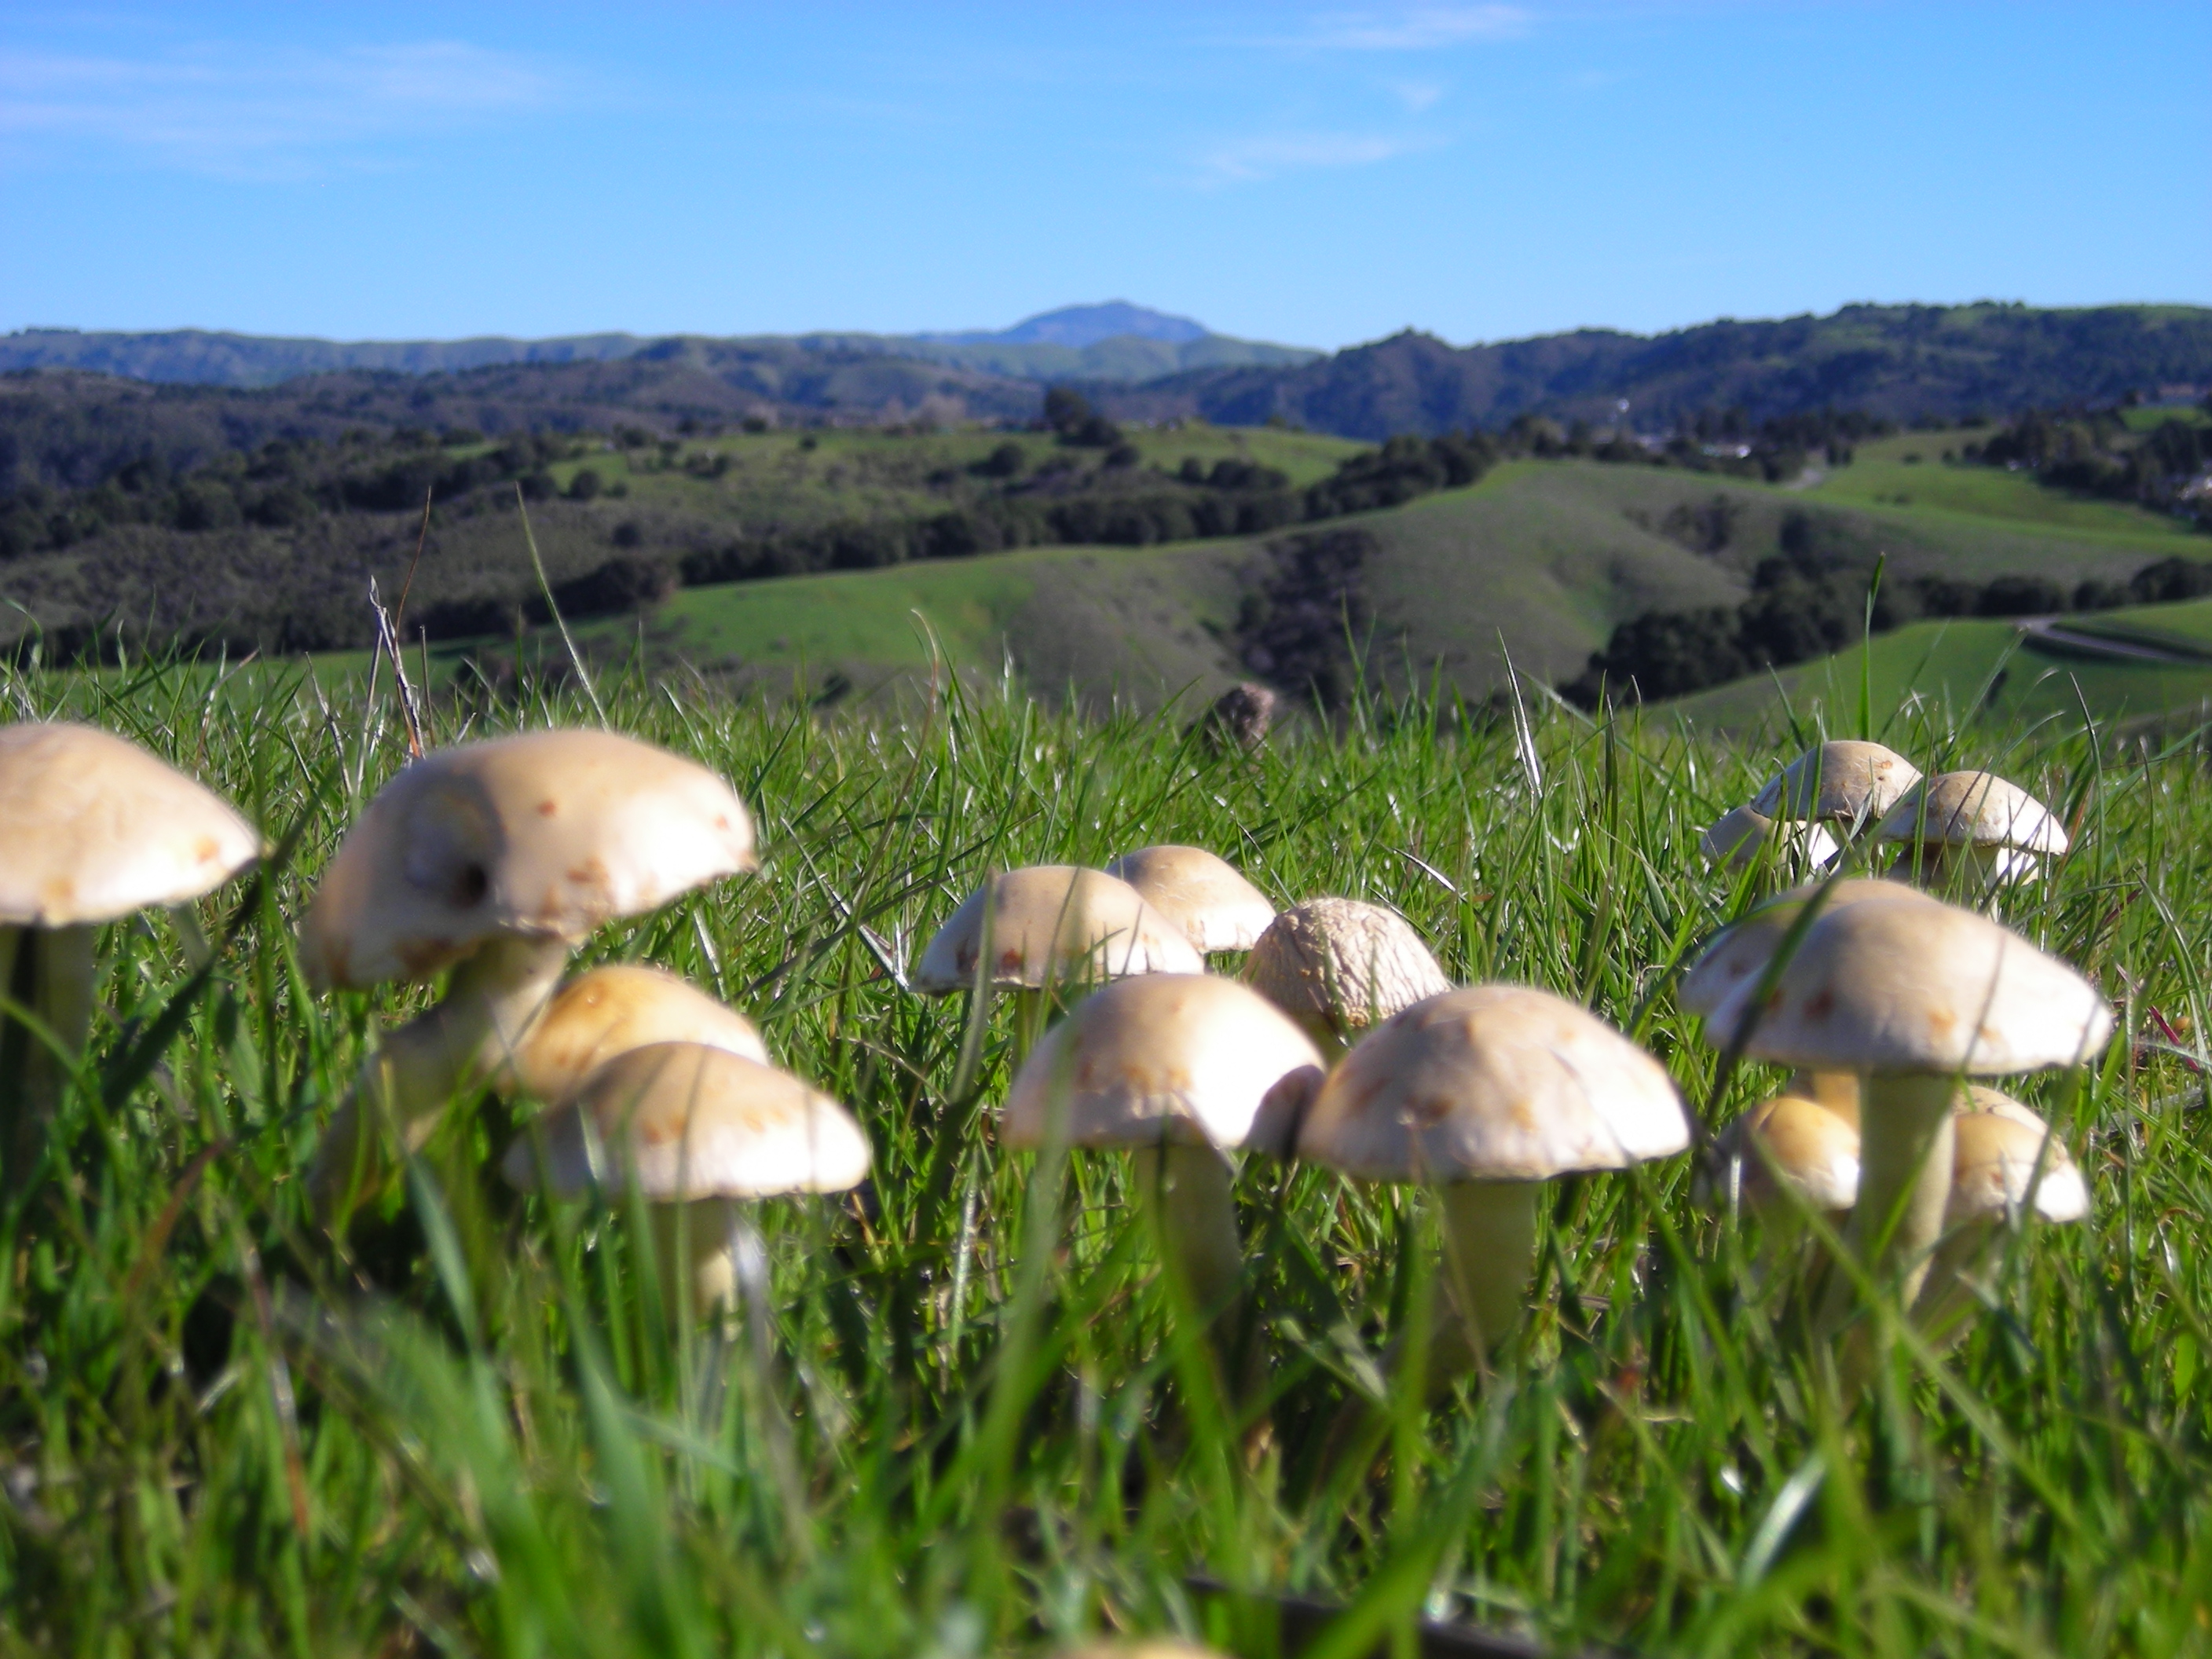 mushrooms_with_mount_diablo_in_background_on_a_hill_top_in_castro_valley_california_photographed_by_karbytes_between_the_years_2004_and_2008_and_retrieved_by_karbytes_on_24_december_2023.JPG